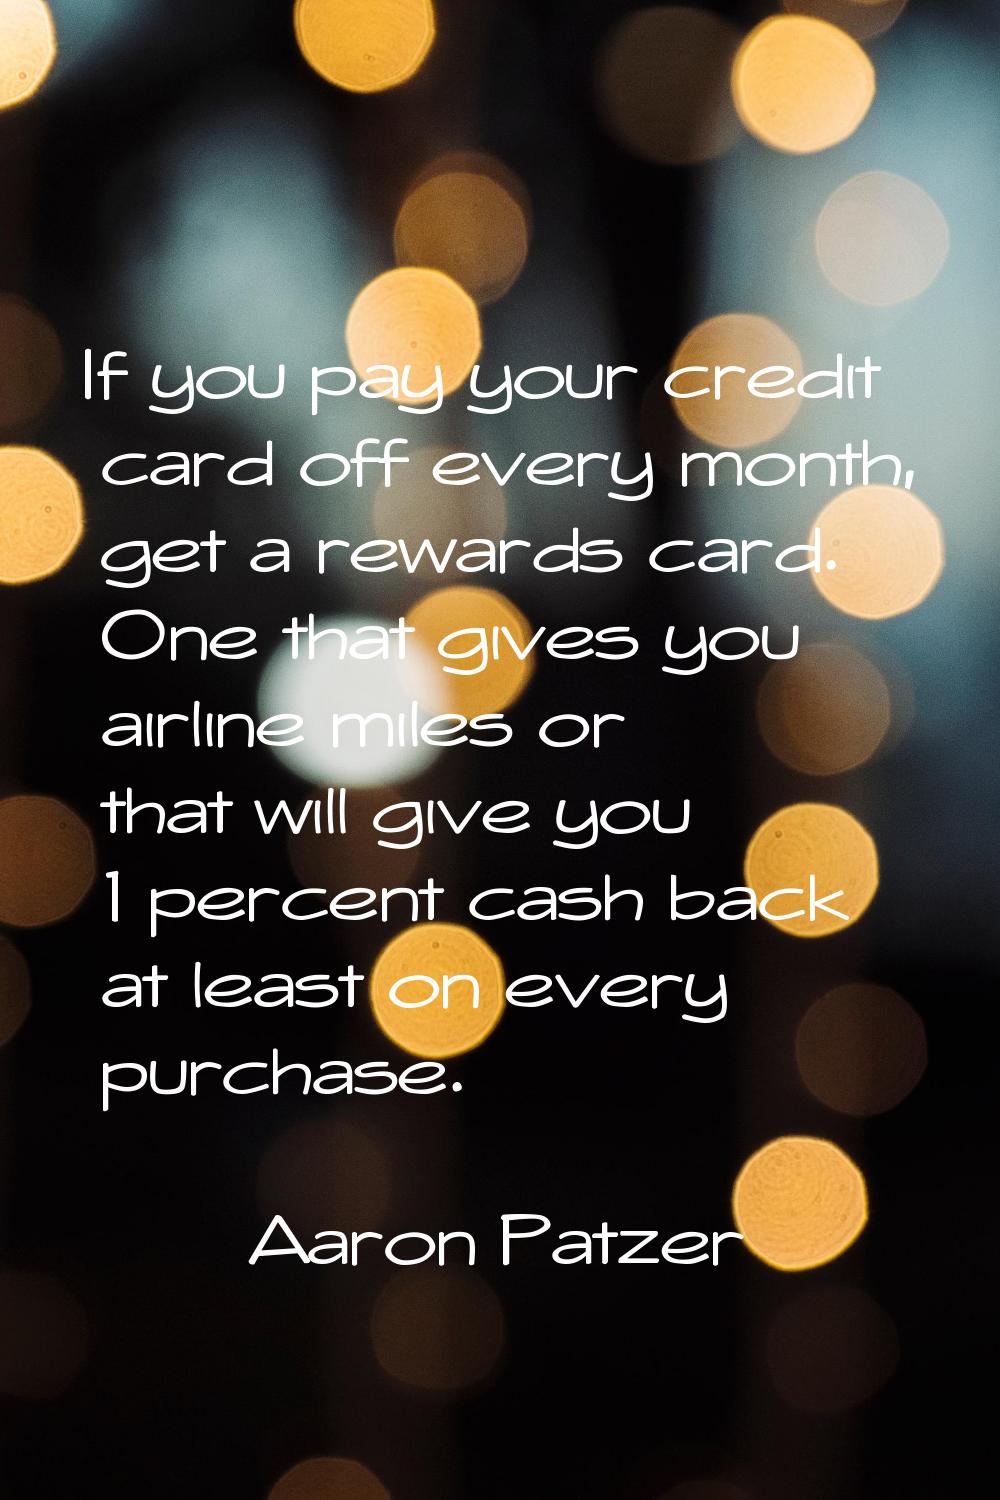 If you pay your credit card off every month, get a rewards card. One that gives you airline miles o